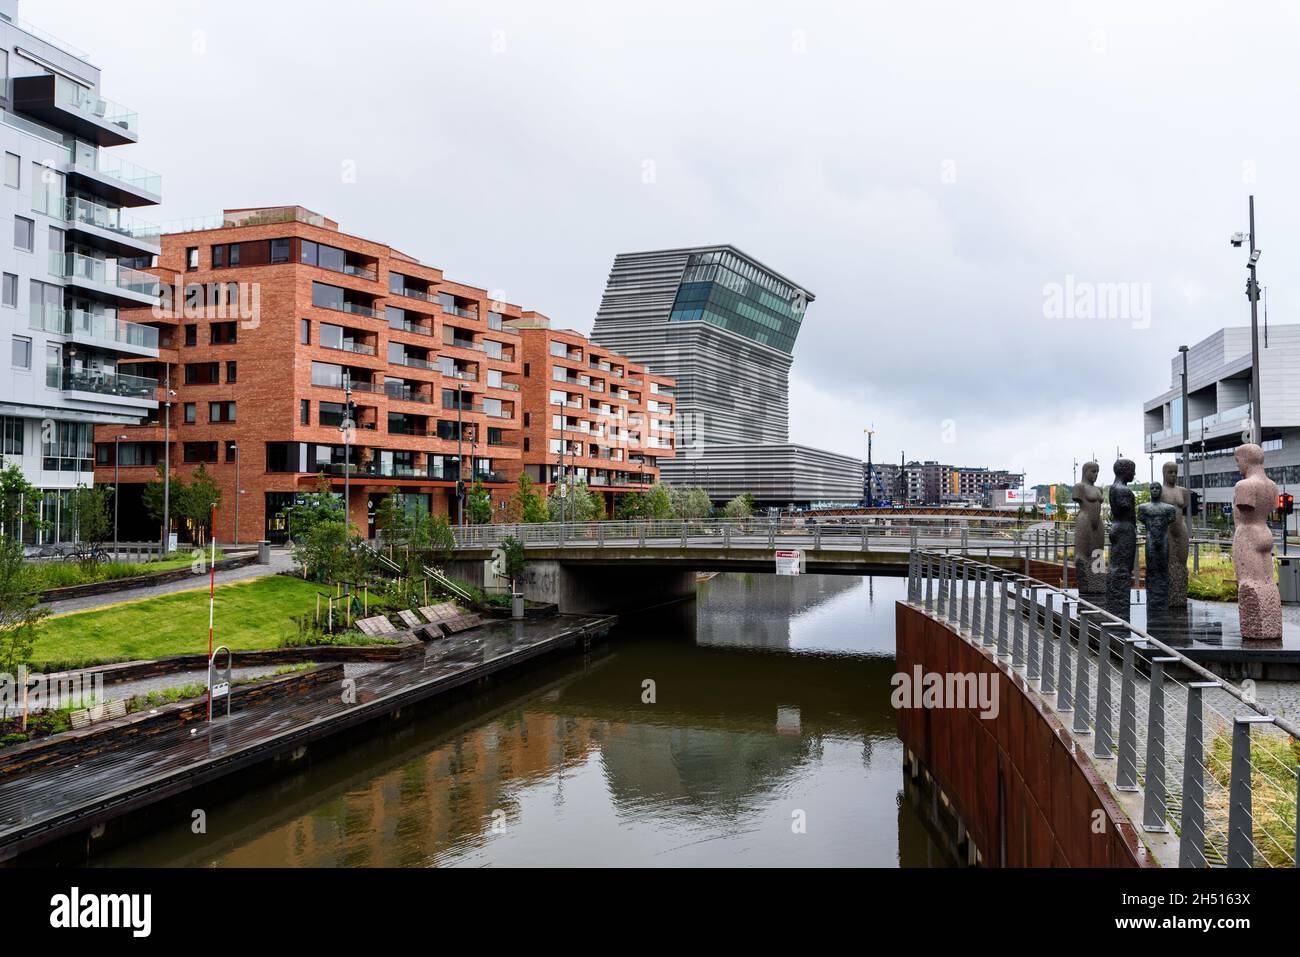 Oslo, Norway - August 11, 2019: View of Barcode Project area and Munch Museum. A redevelopment on former dock and industrial land in central Oslo. Stock Photo